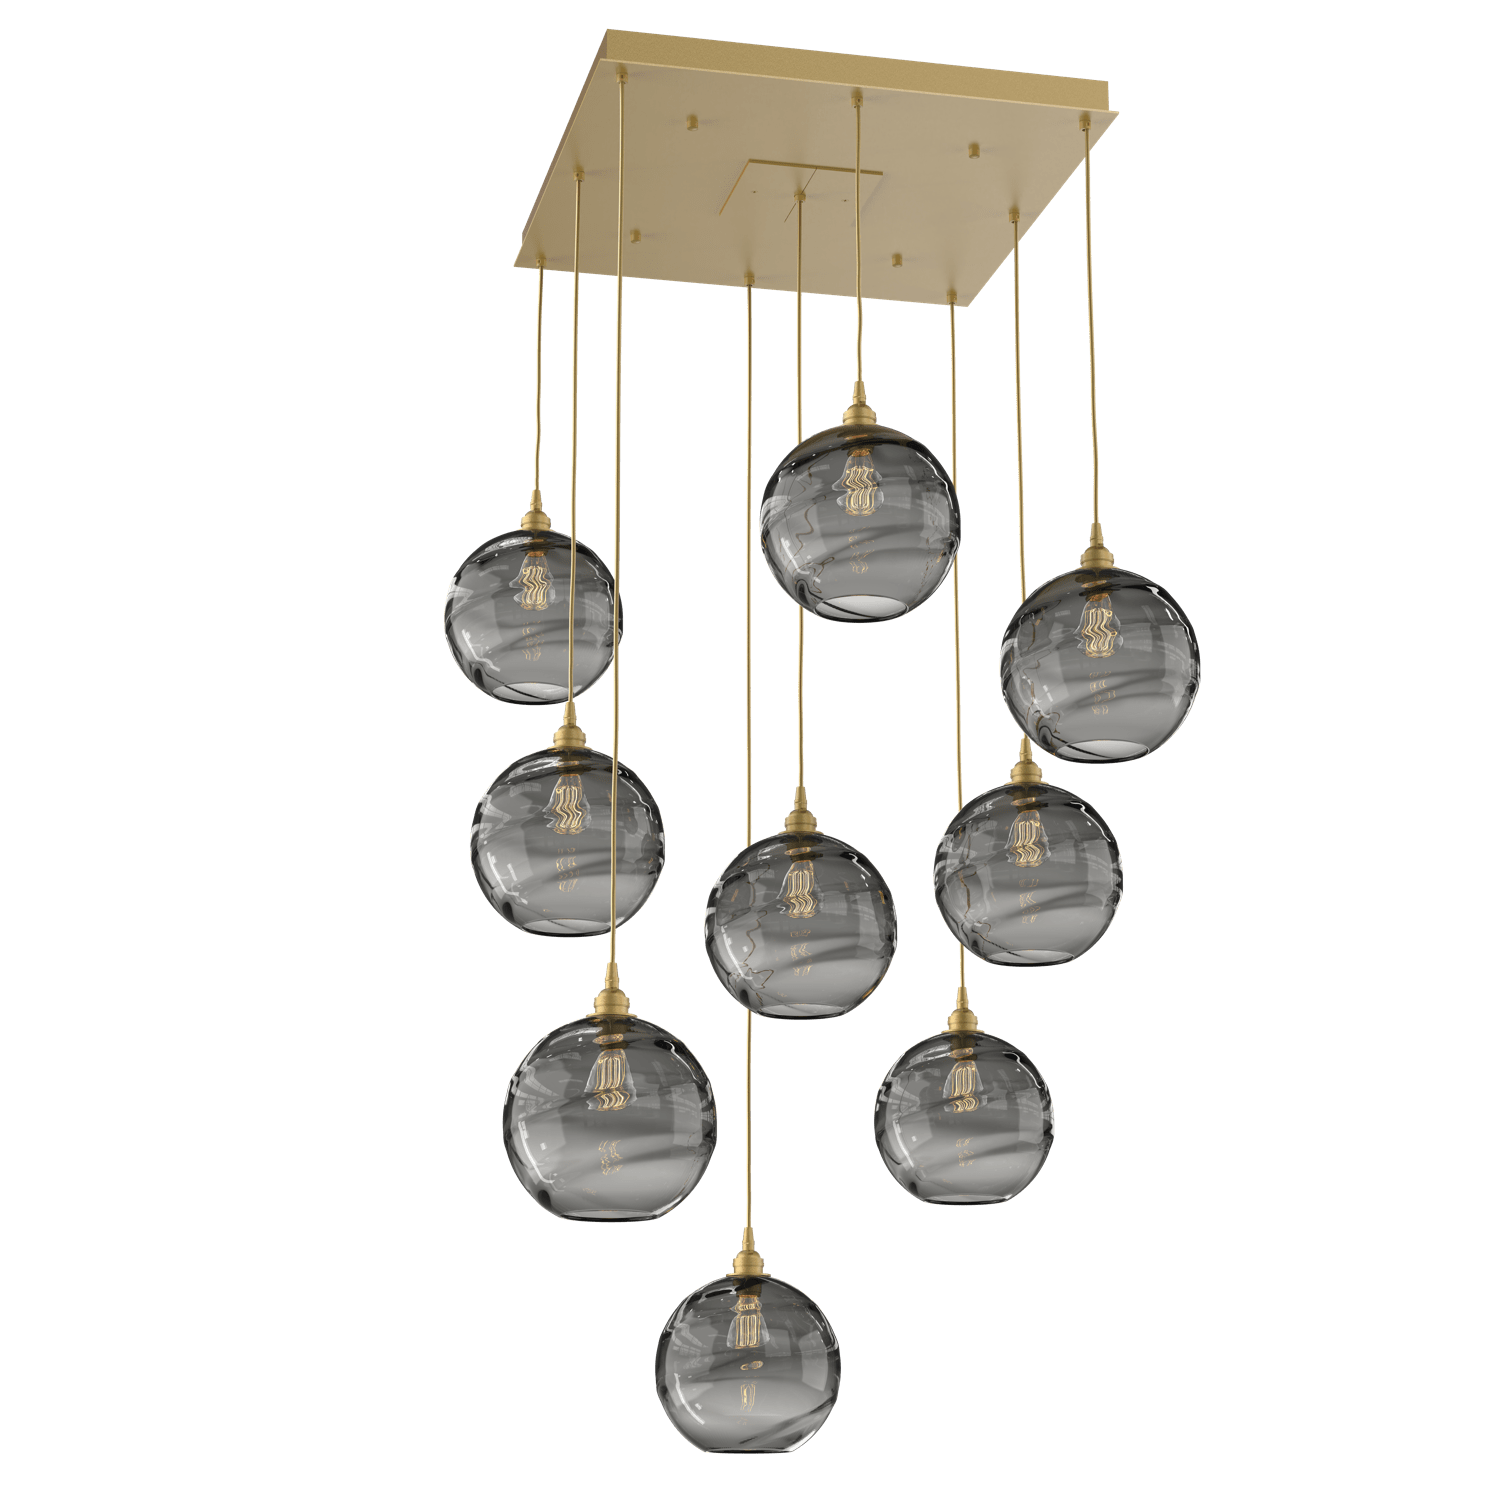 CHB0047-09-GB-OS-Hammerton-Studio-Optic-Blown-Glass-Terra-9-light-square-pendant-chandelier-with-gilded-brass-finish-and-optic-smoke-blown-glass-shades-and-incandescent-lamping